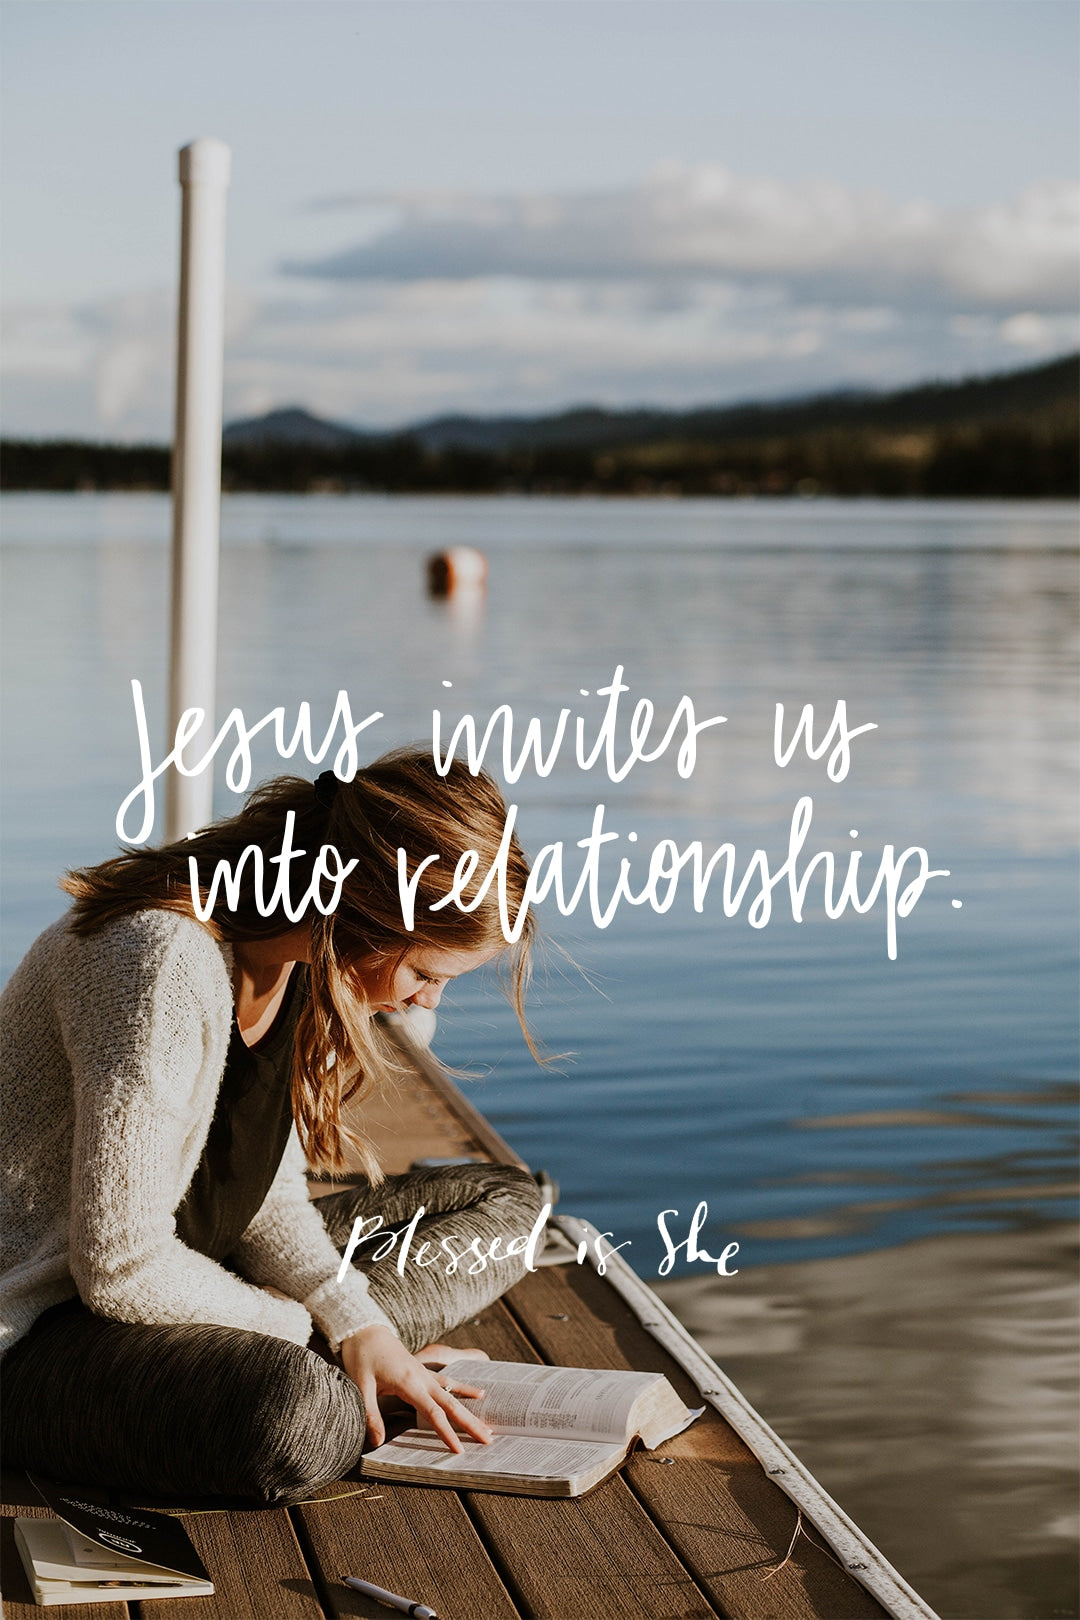 Jesus: It's About the Relationship